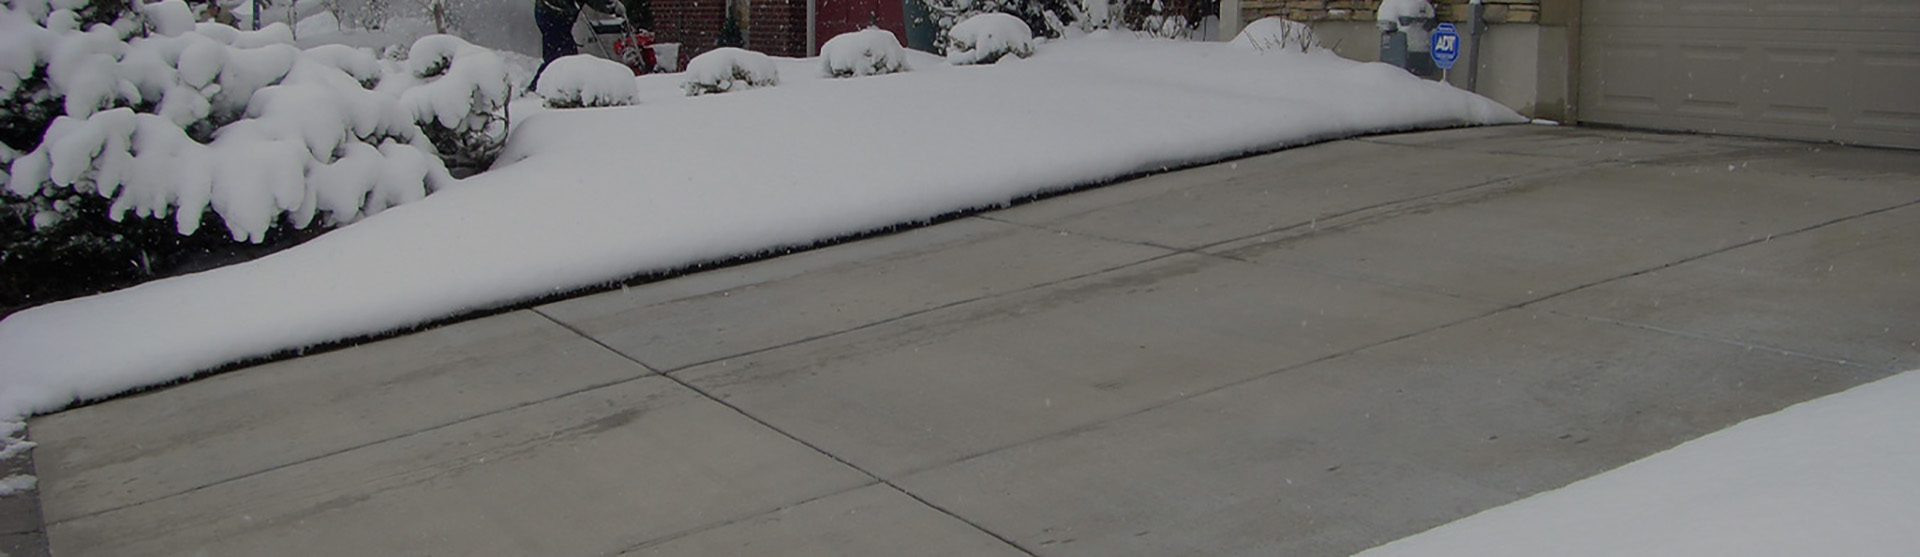 Driveway snow melting systems banner